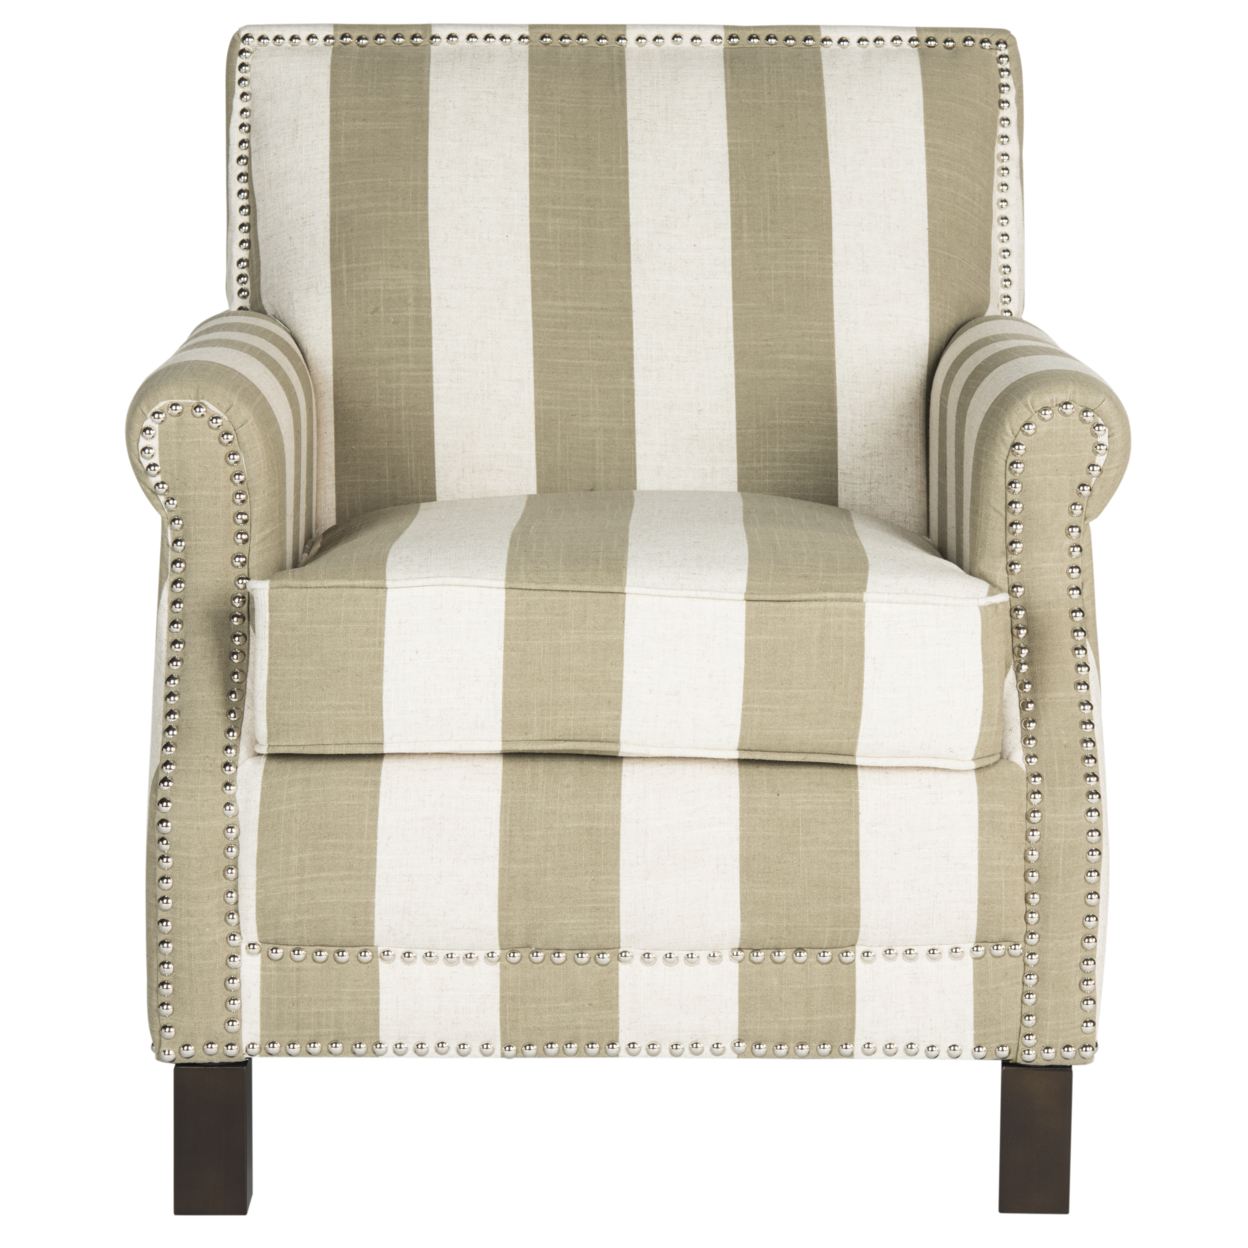 SAFAVIEH Easton Rustic Glam Upholstered Club Chair w/ Nailheads, Olive/White - image 2 of 7